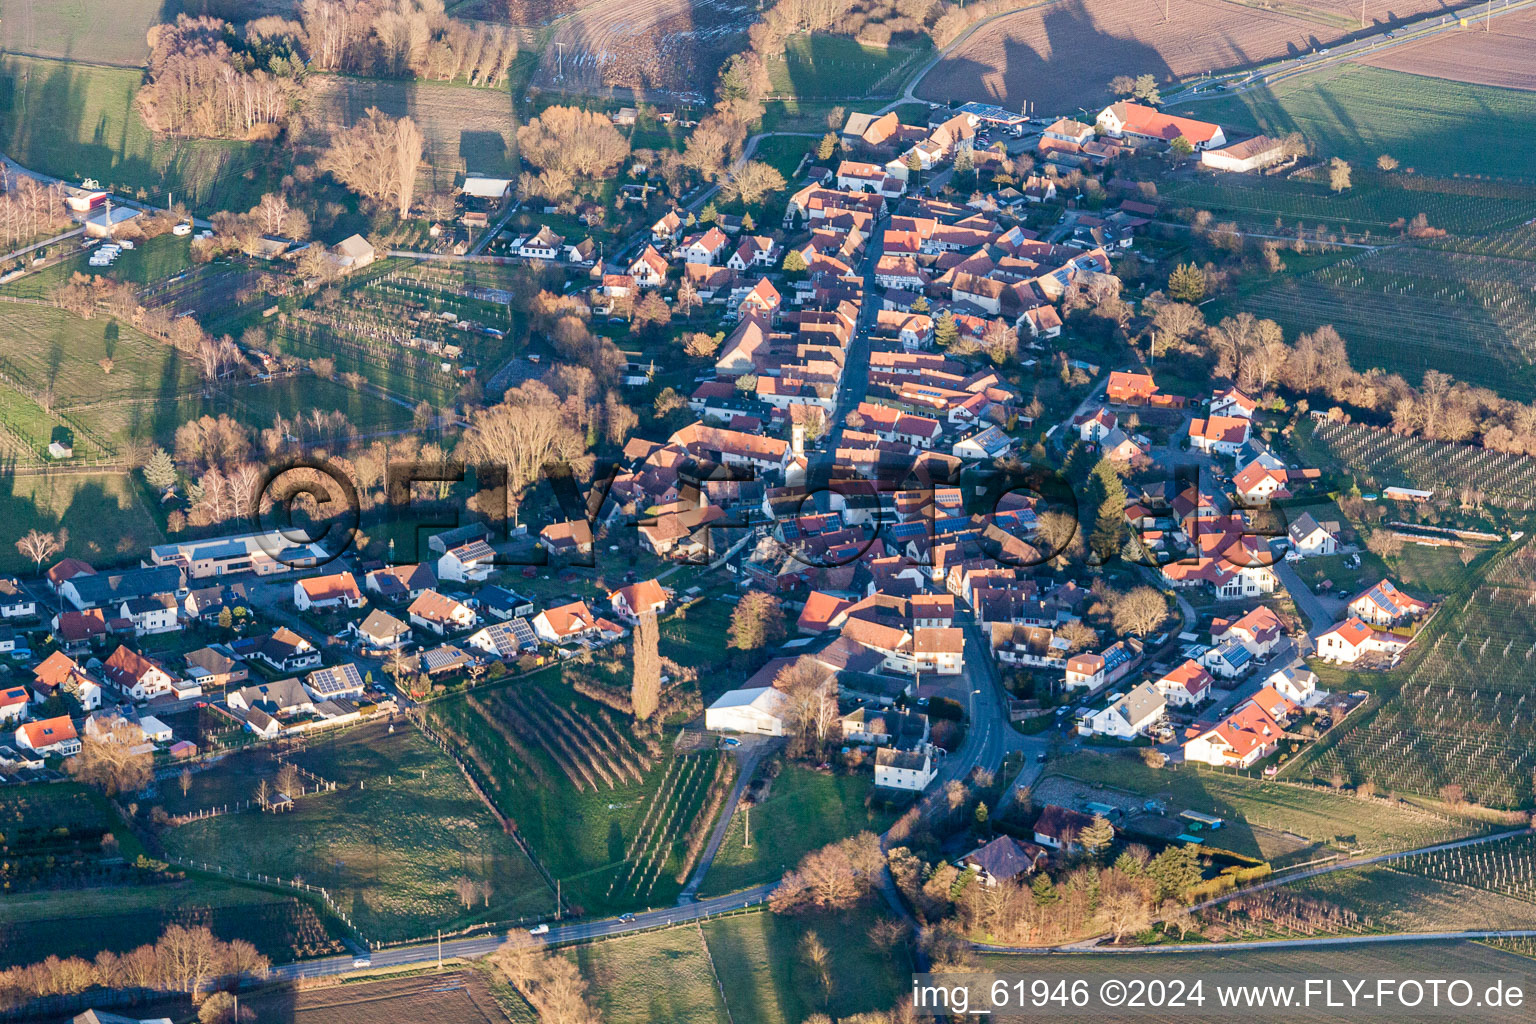 Aerial photograpy of Village - view on the edge of agricultural fields and farmland in Oberhausen in the state Rhineland-Palatinate, Germany